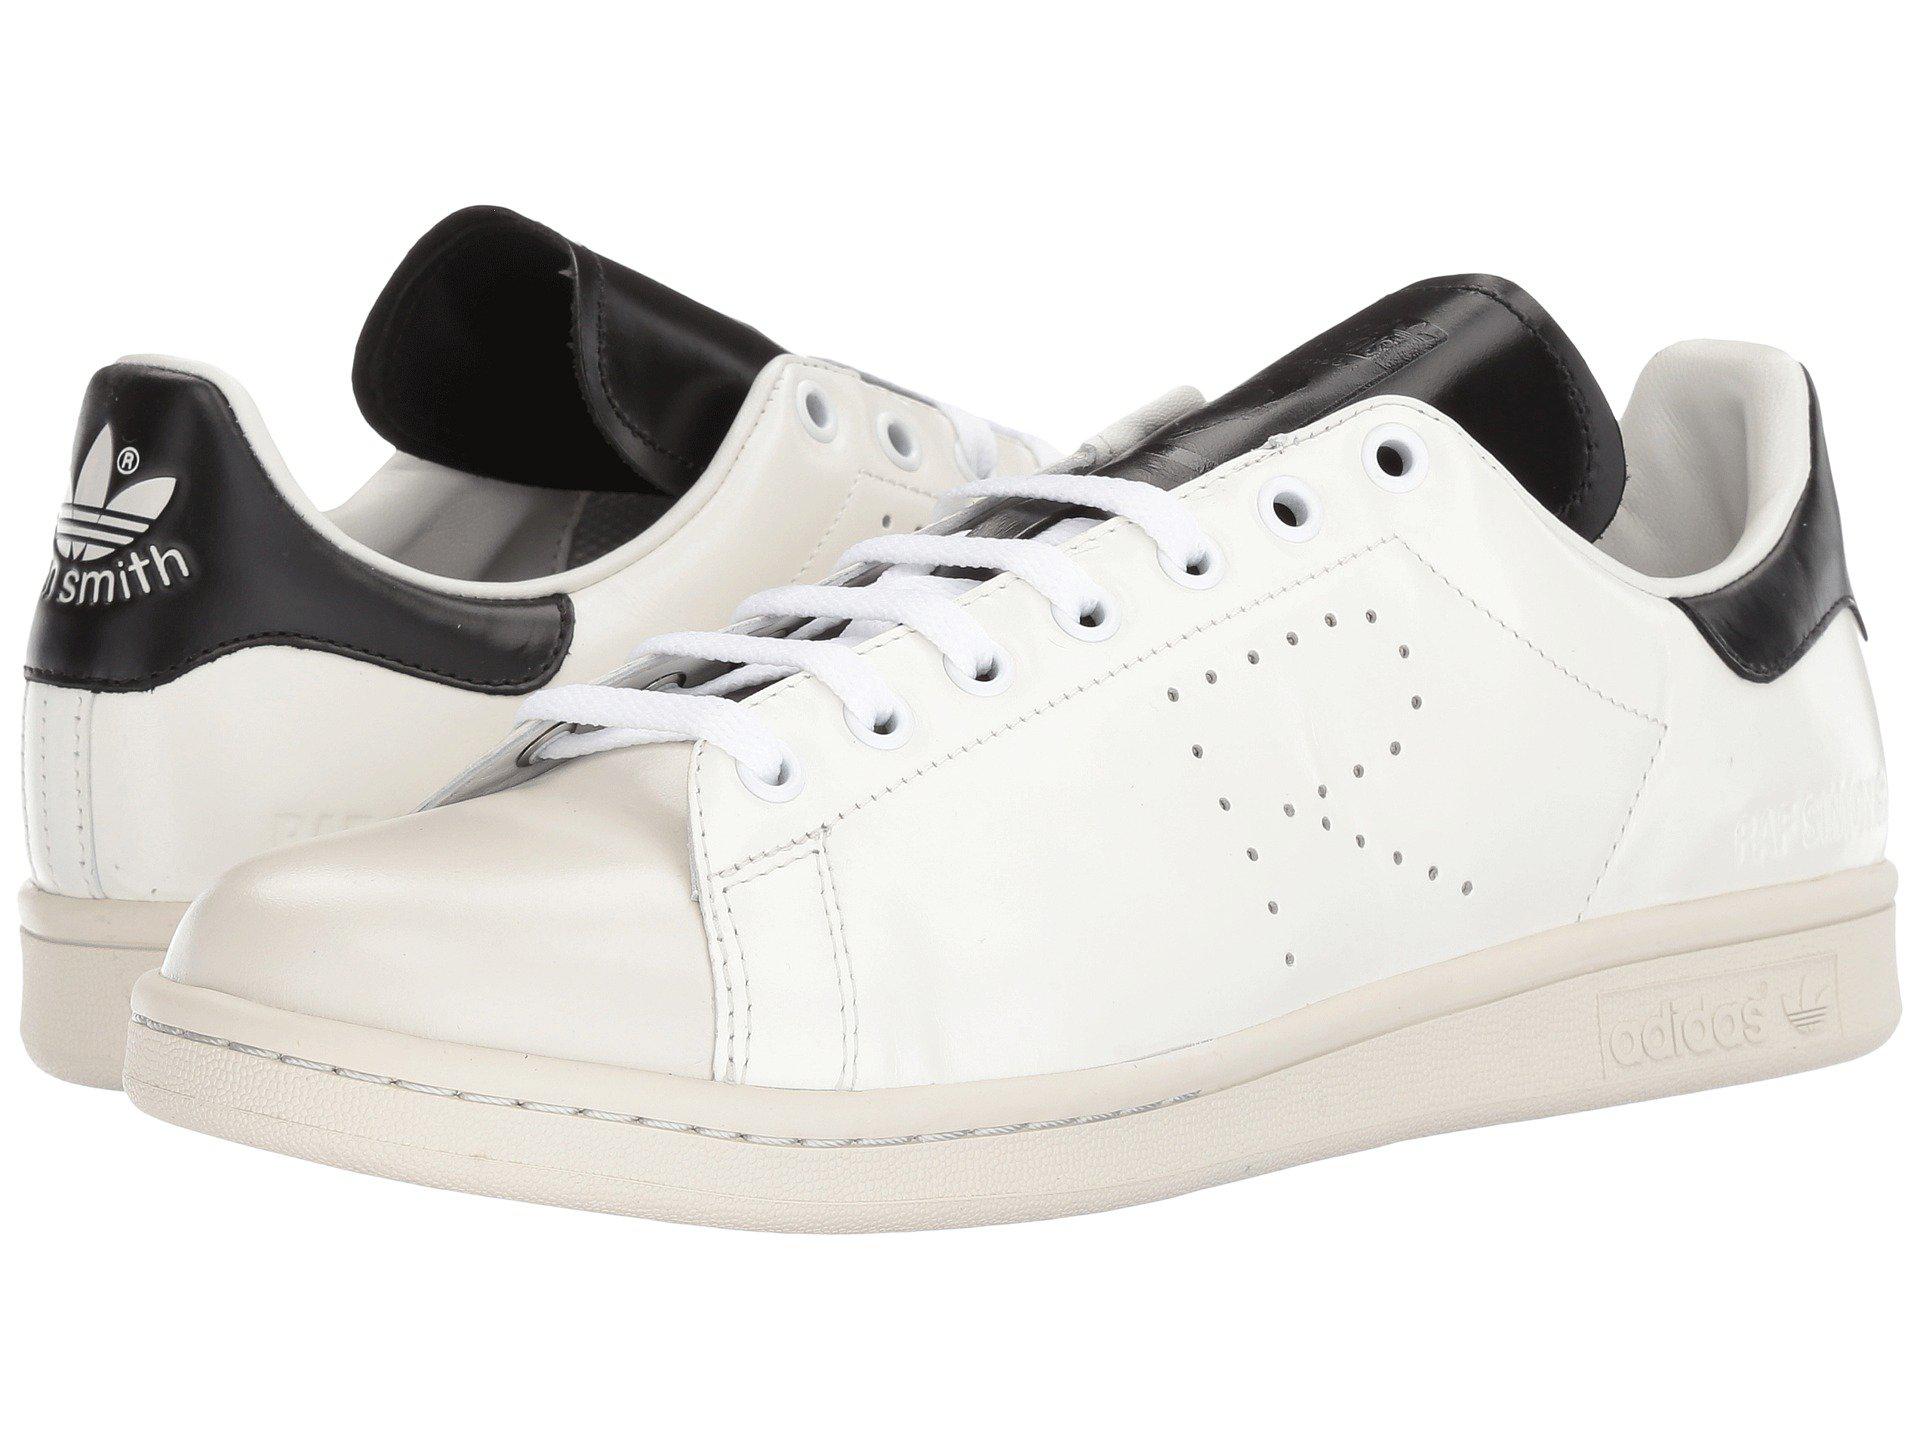 Adidas Stan Smith Raf Simons White Black on Sale, SAVE 50% - aveclumiere.com